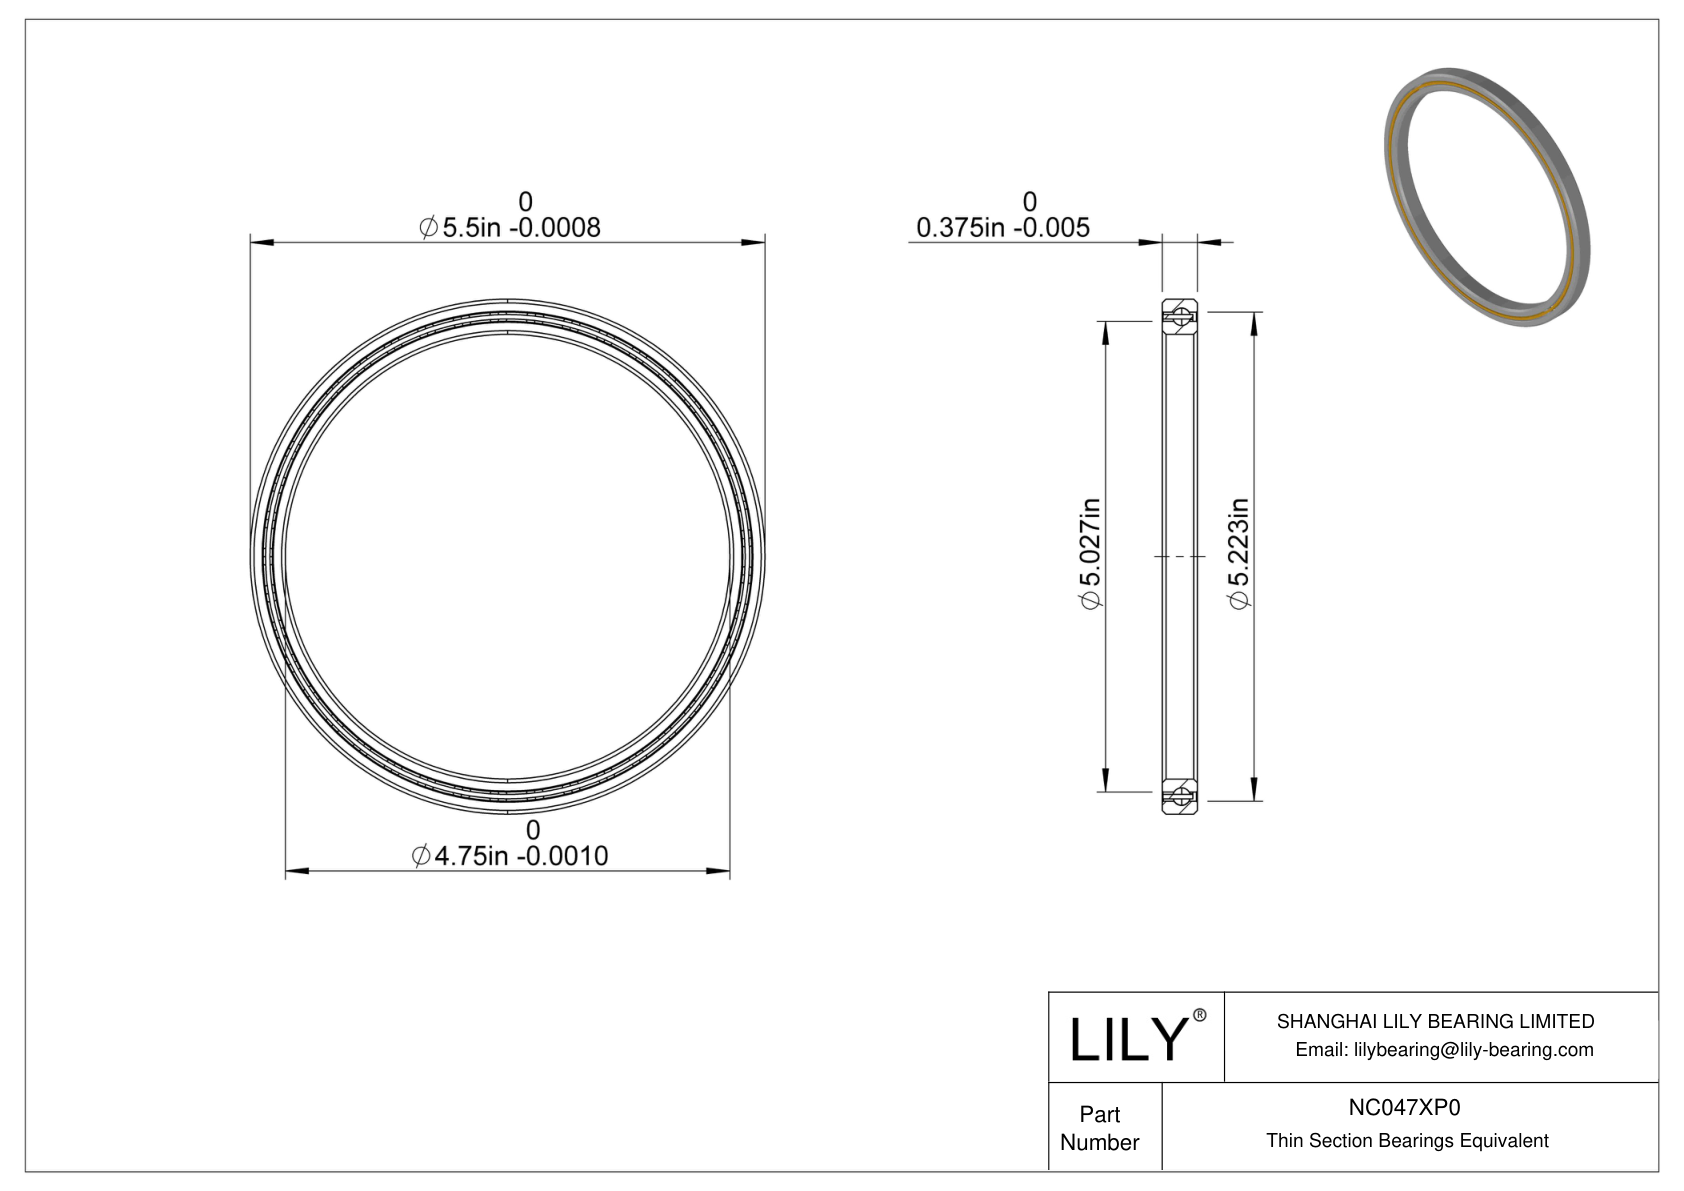 NC047XP0 Constant Section (CS) Bearings cad drawing